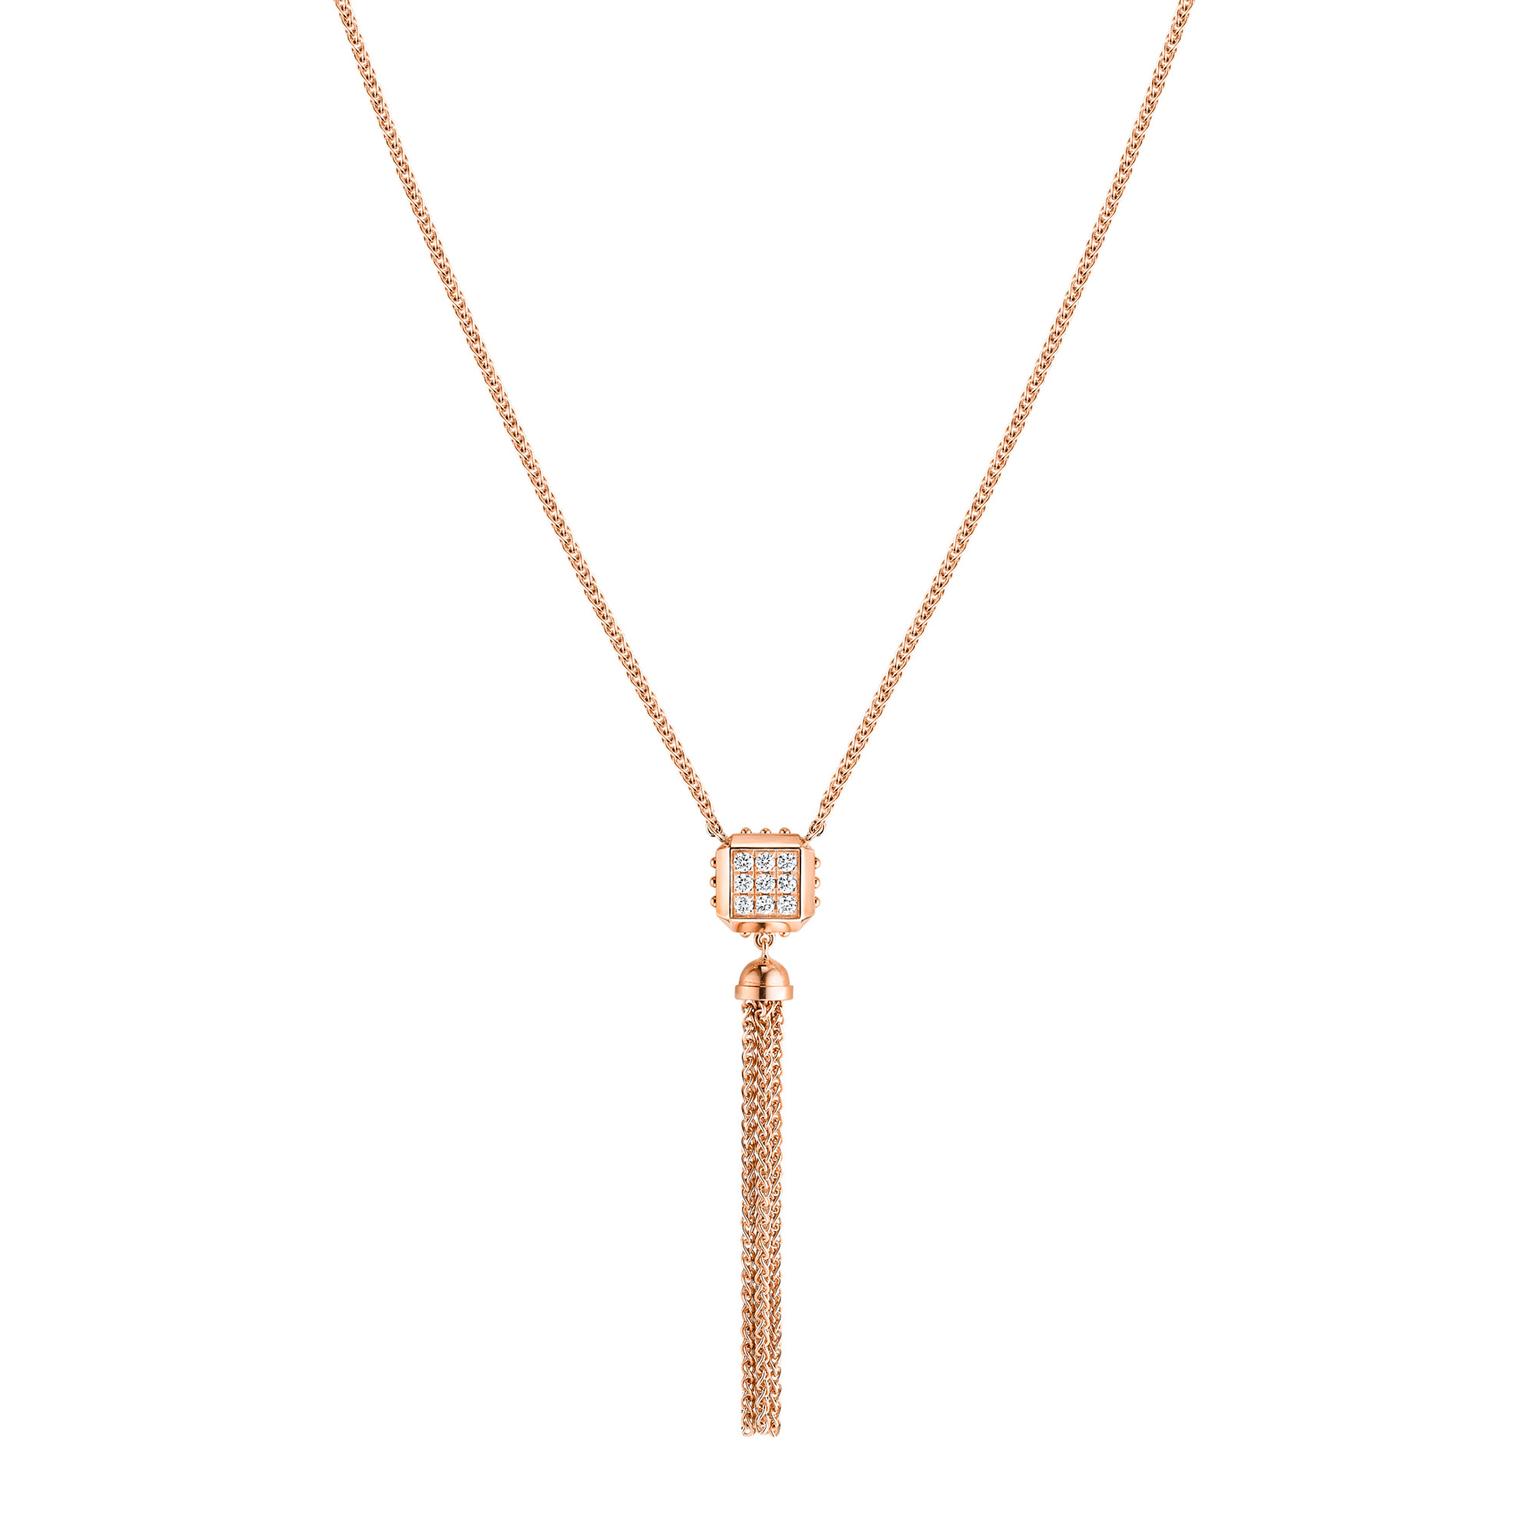 Louis Vuitton Emprise pendant necklace in pink gold with diamonds